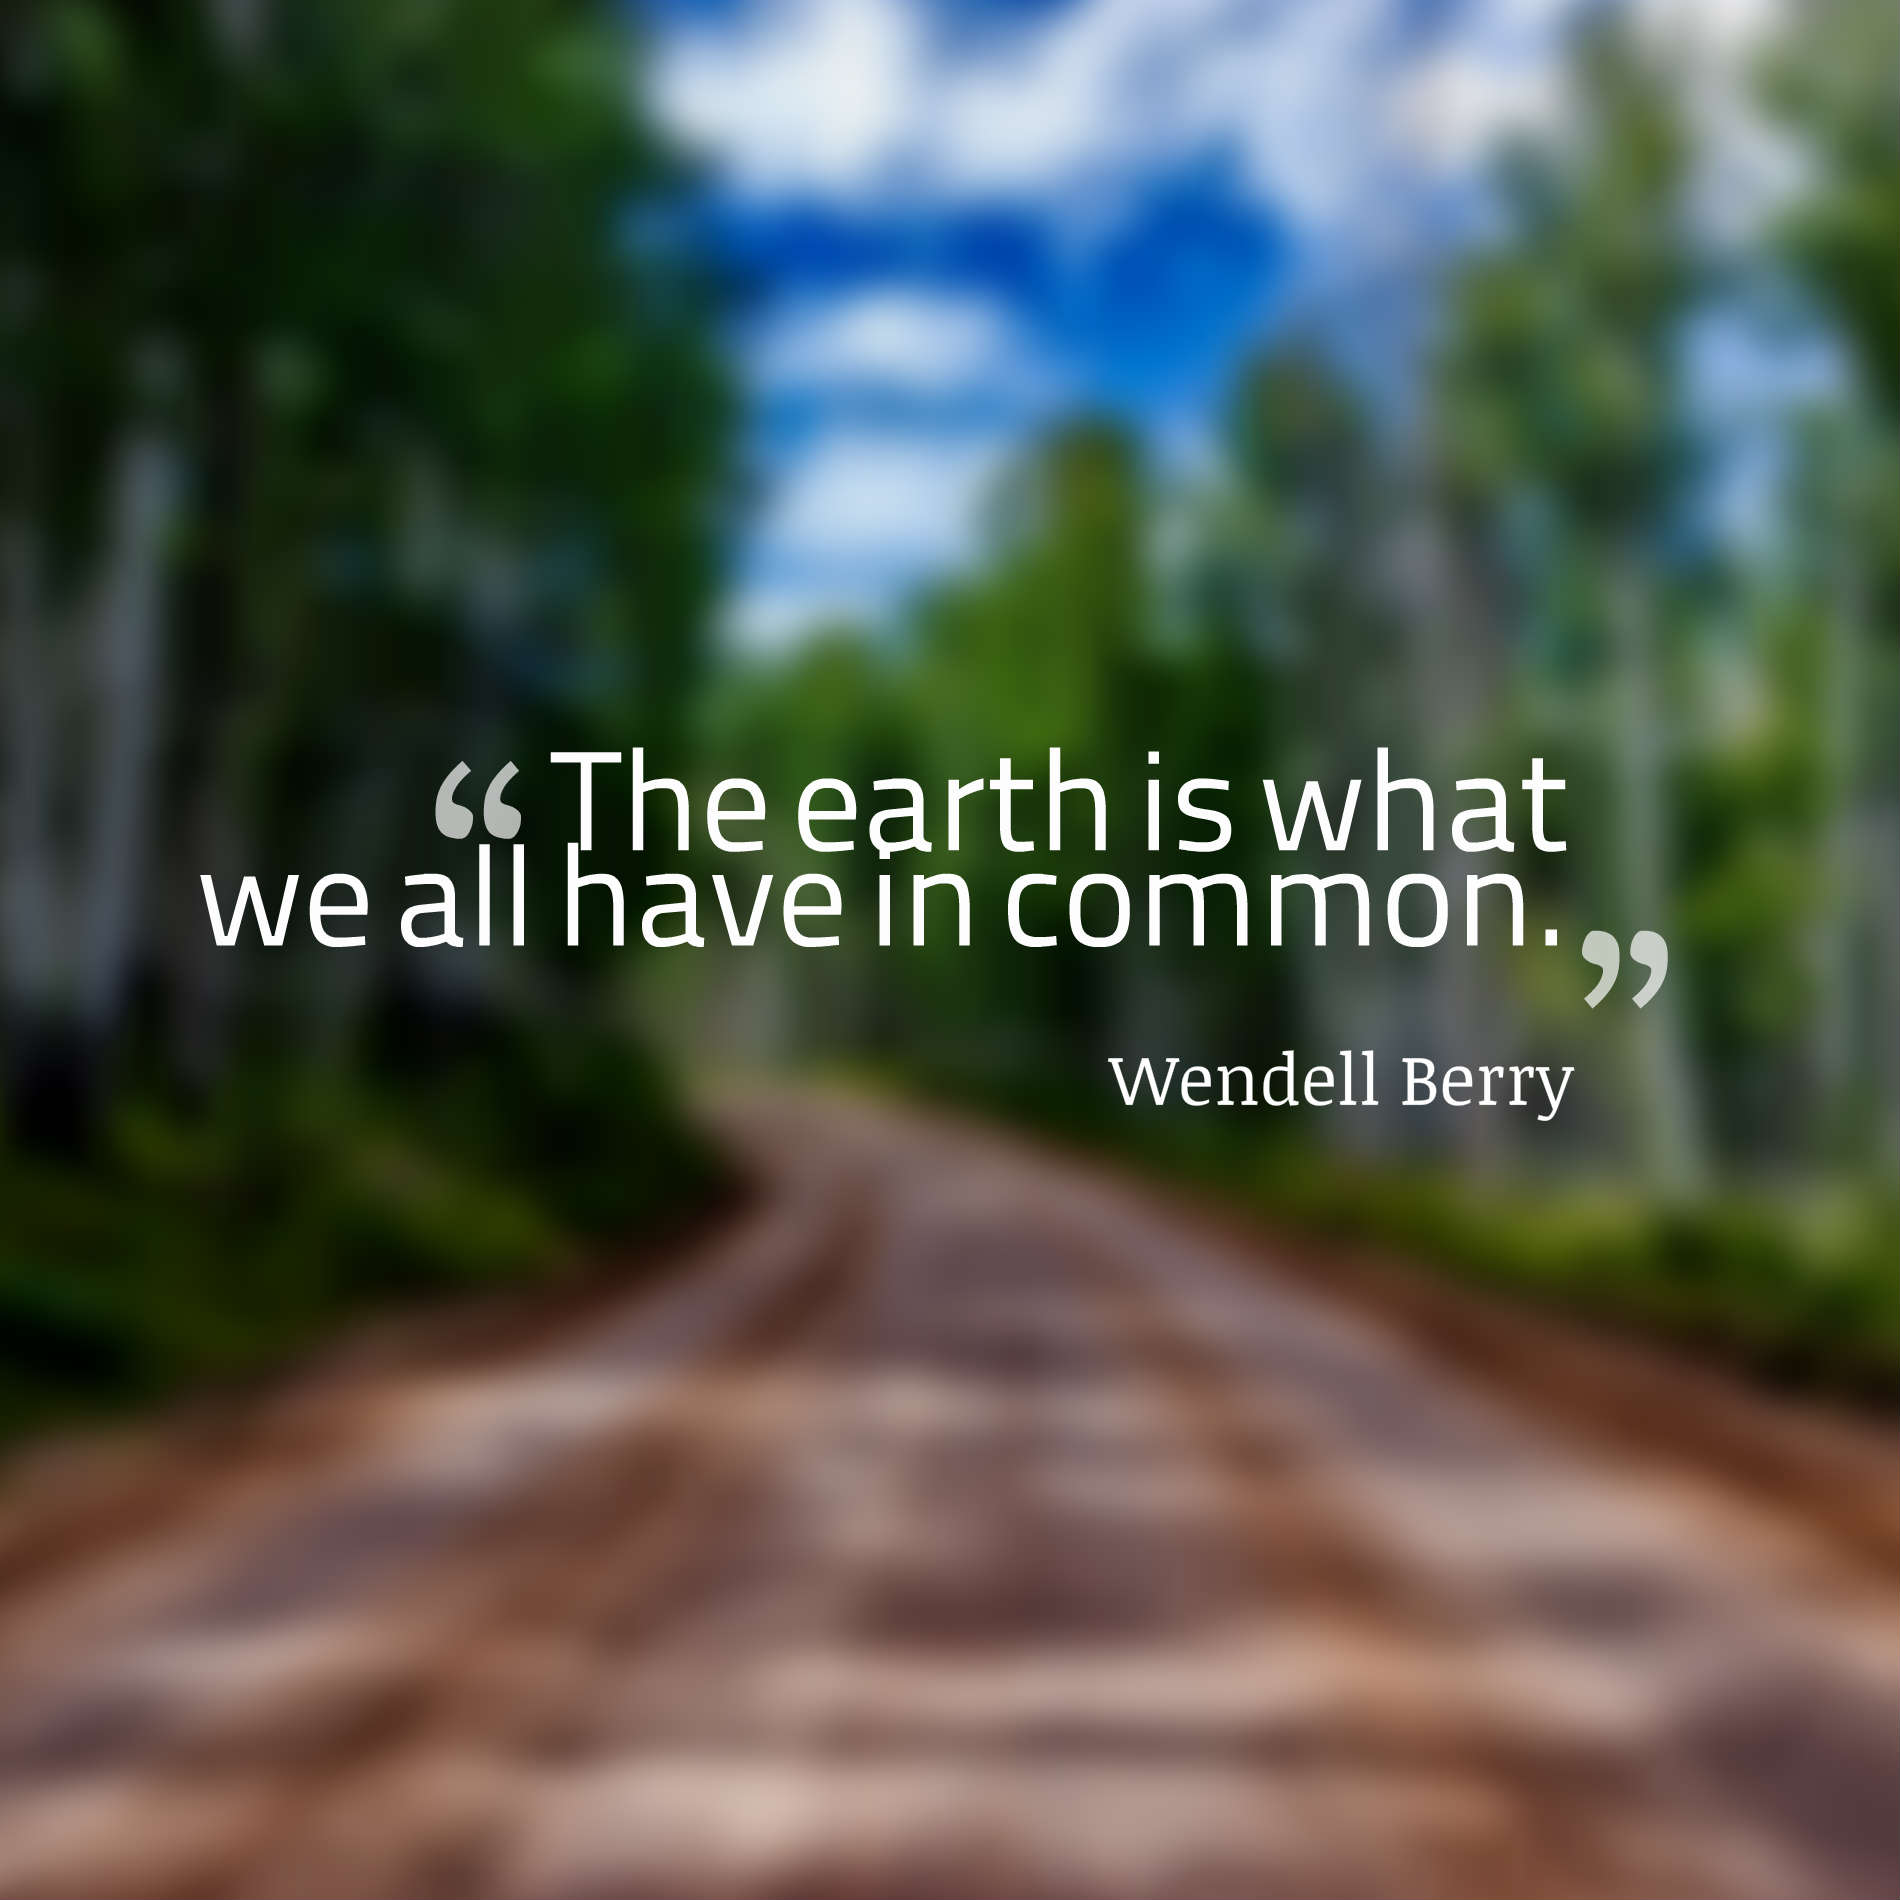 The earth is what we all have in common.